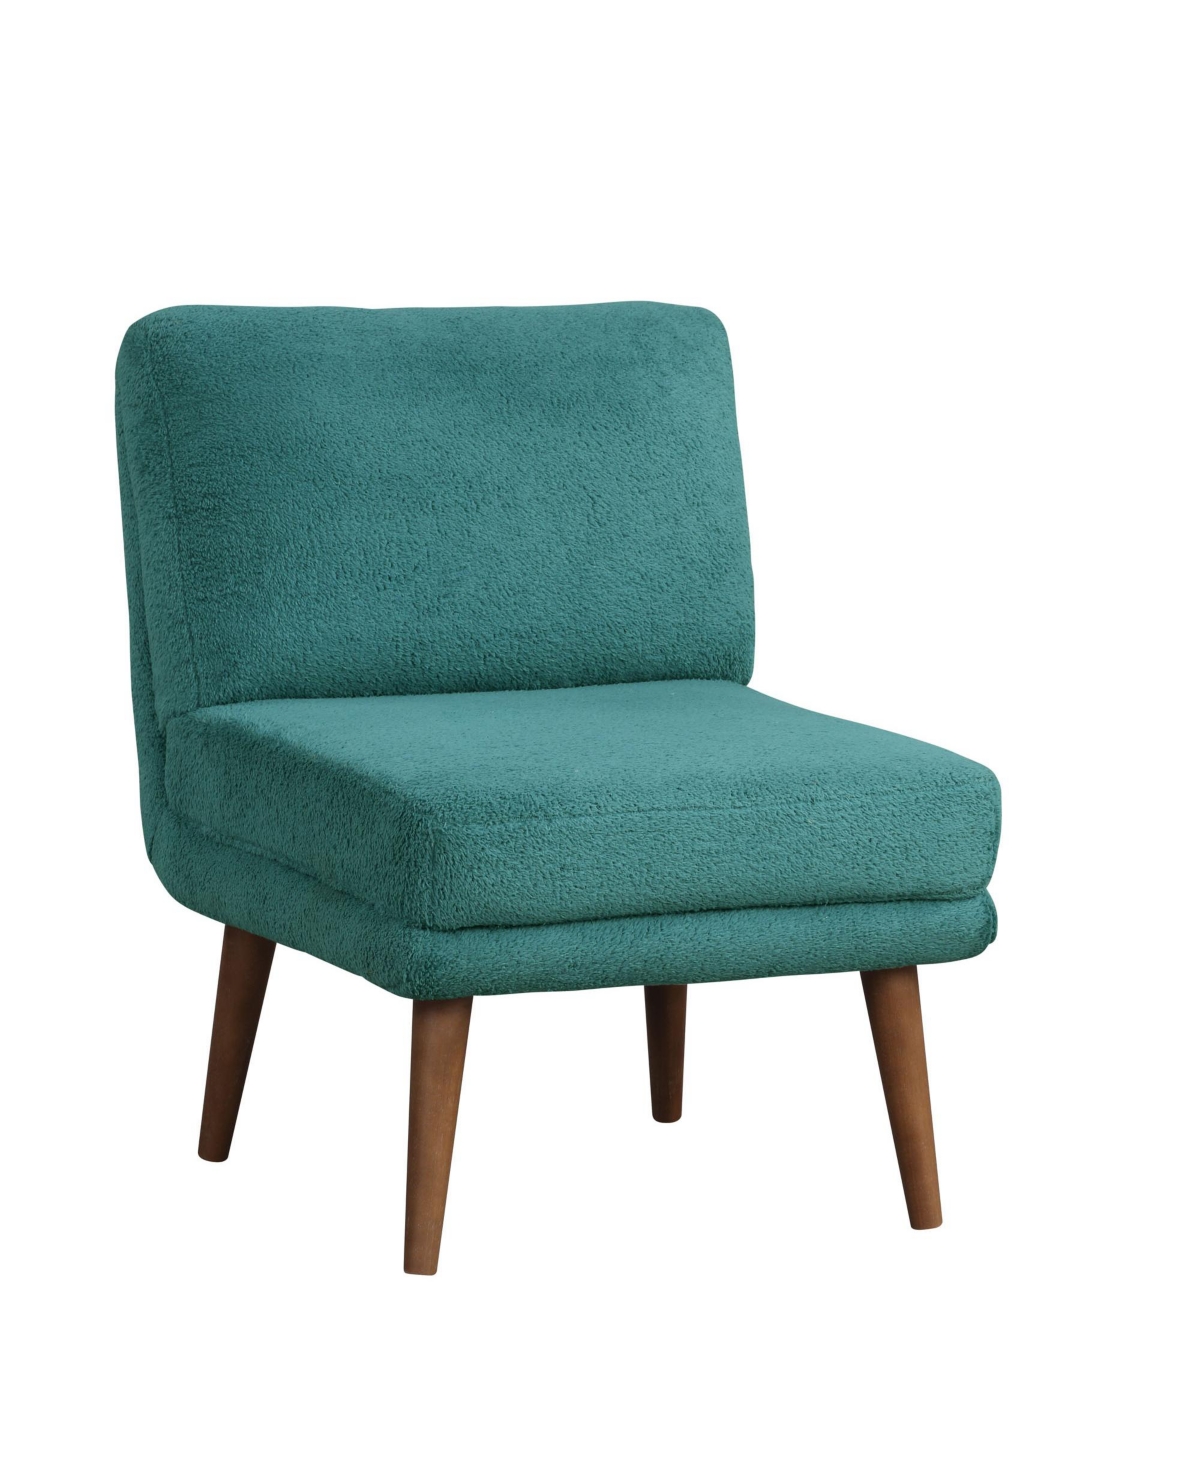 Lifestyle Solutions 31.9" Wood, Steel, Foam And Polyester Darcy Armless Accent Chair In Teal